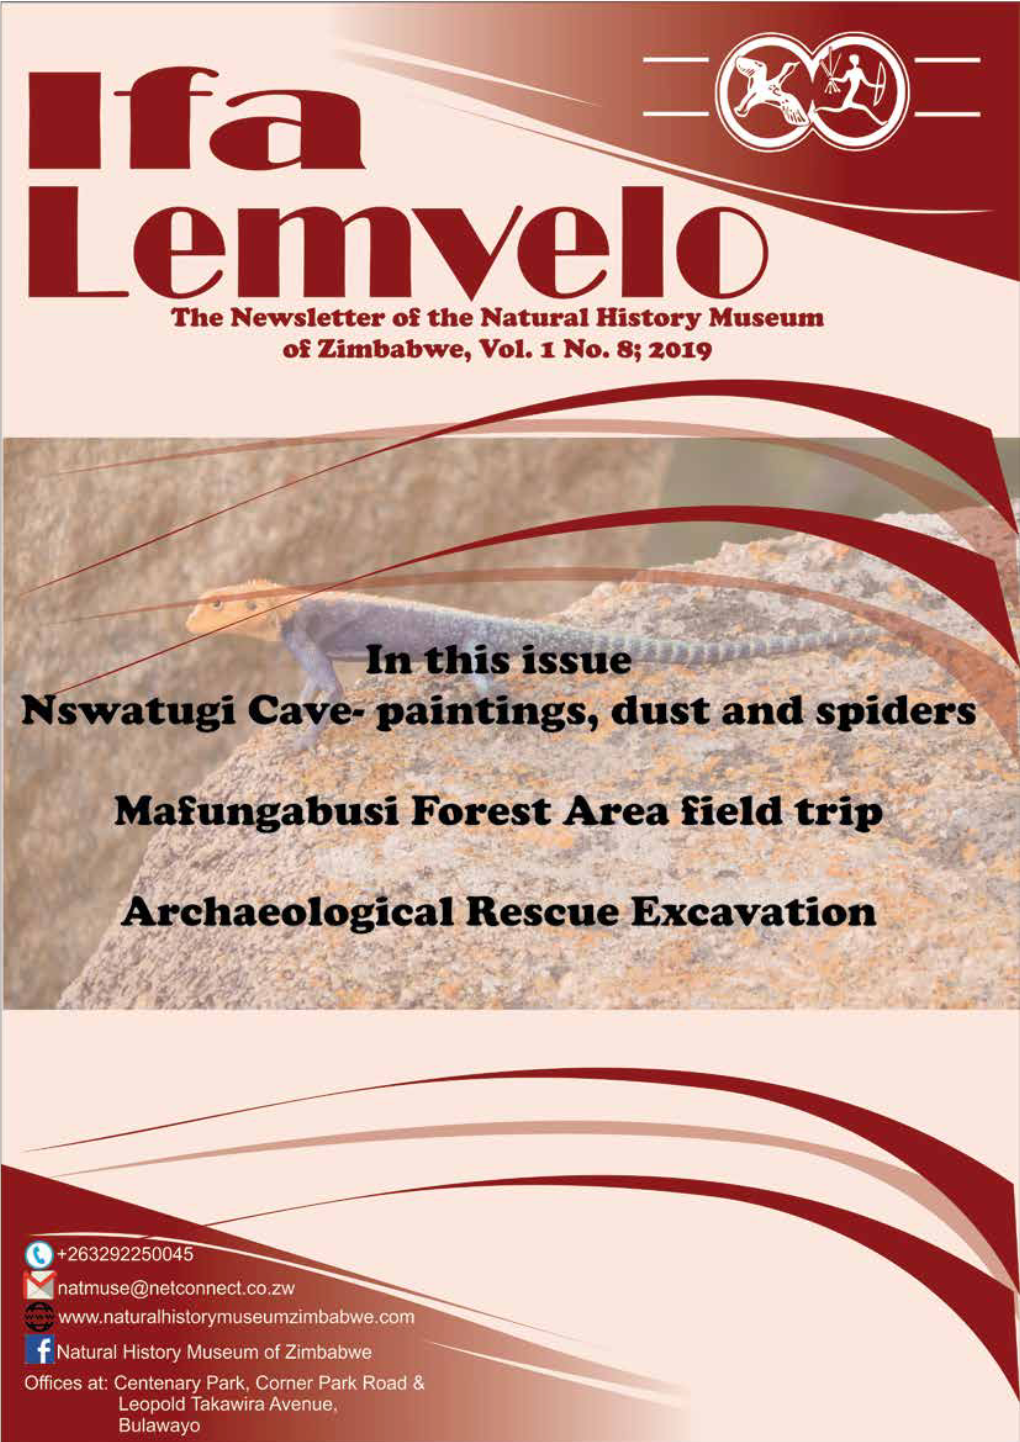 Nswatugi Cave – Paintings, Dust and Spiders